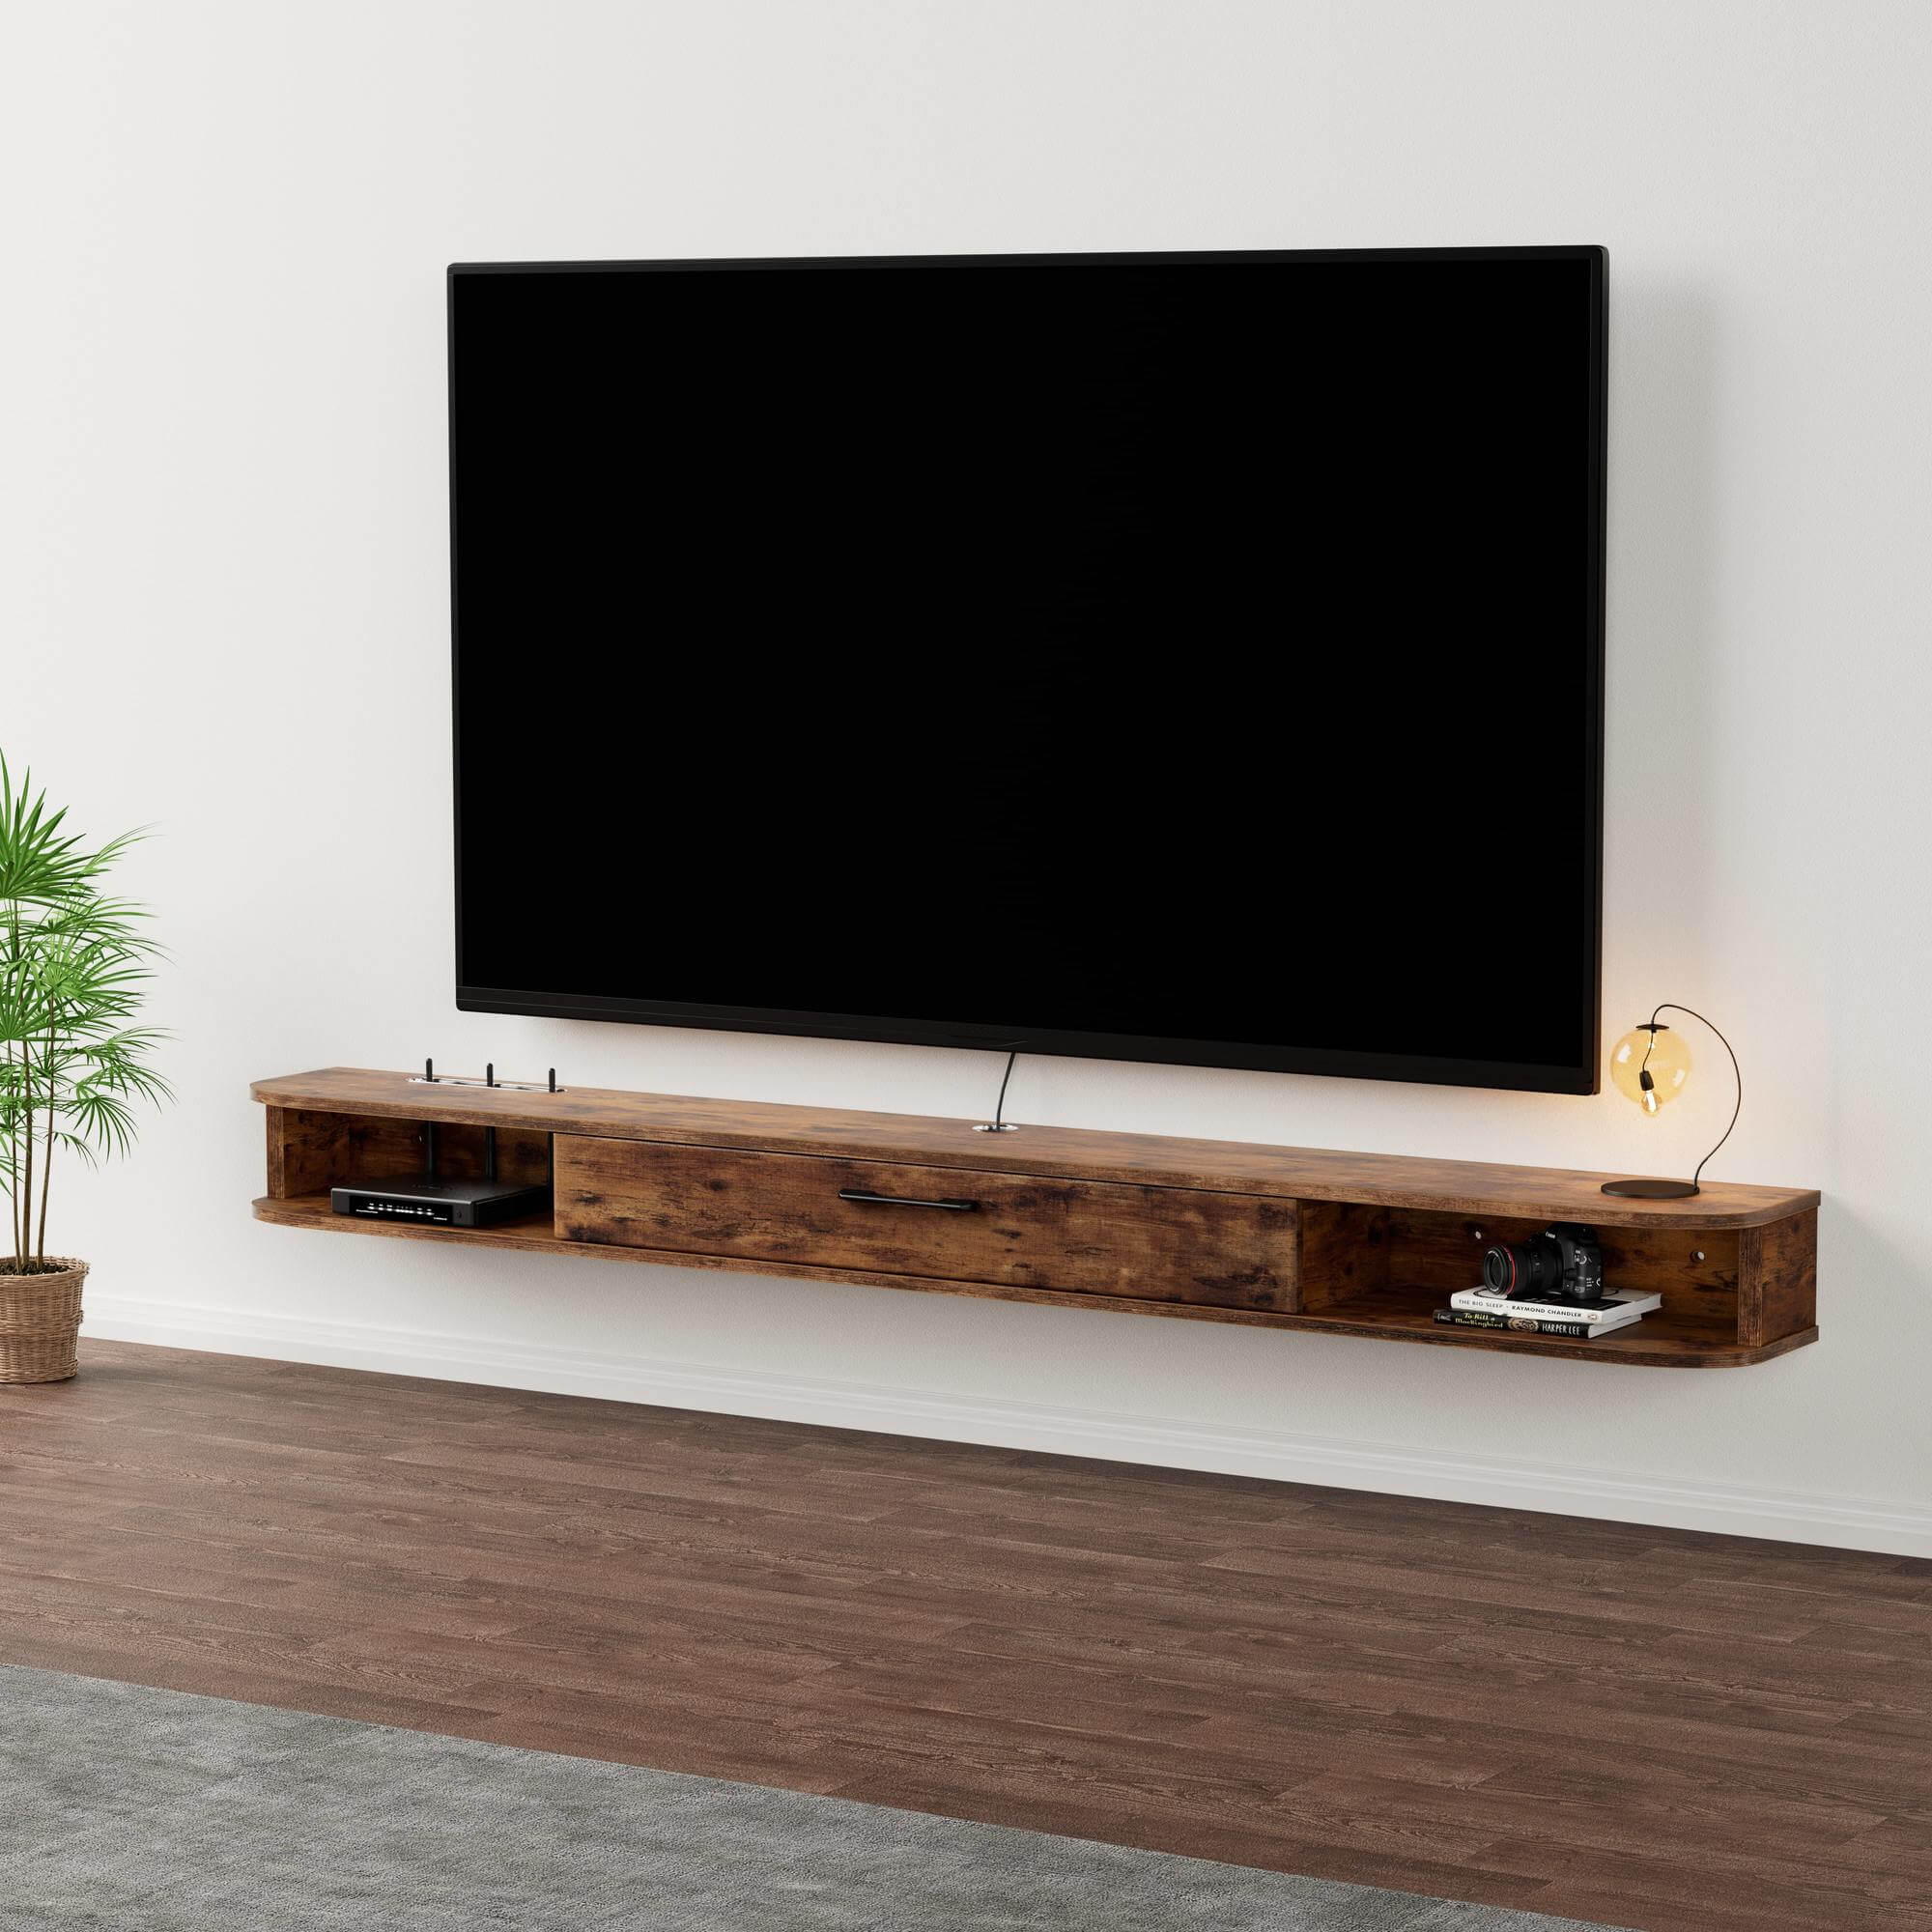 78.74" Rustic Brown Plywood Slim Floating TV Stand Wall Shelf for 85" TV